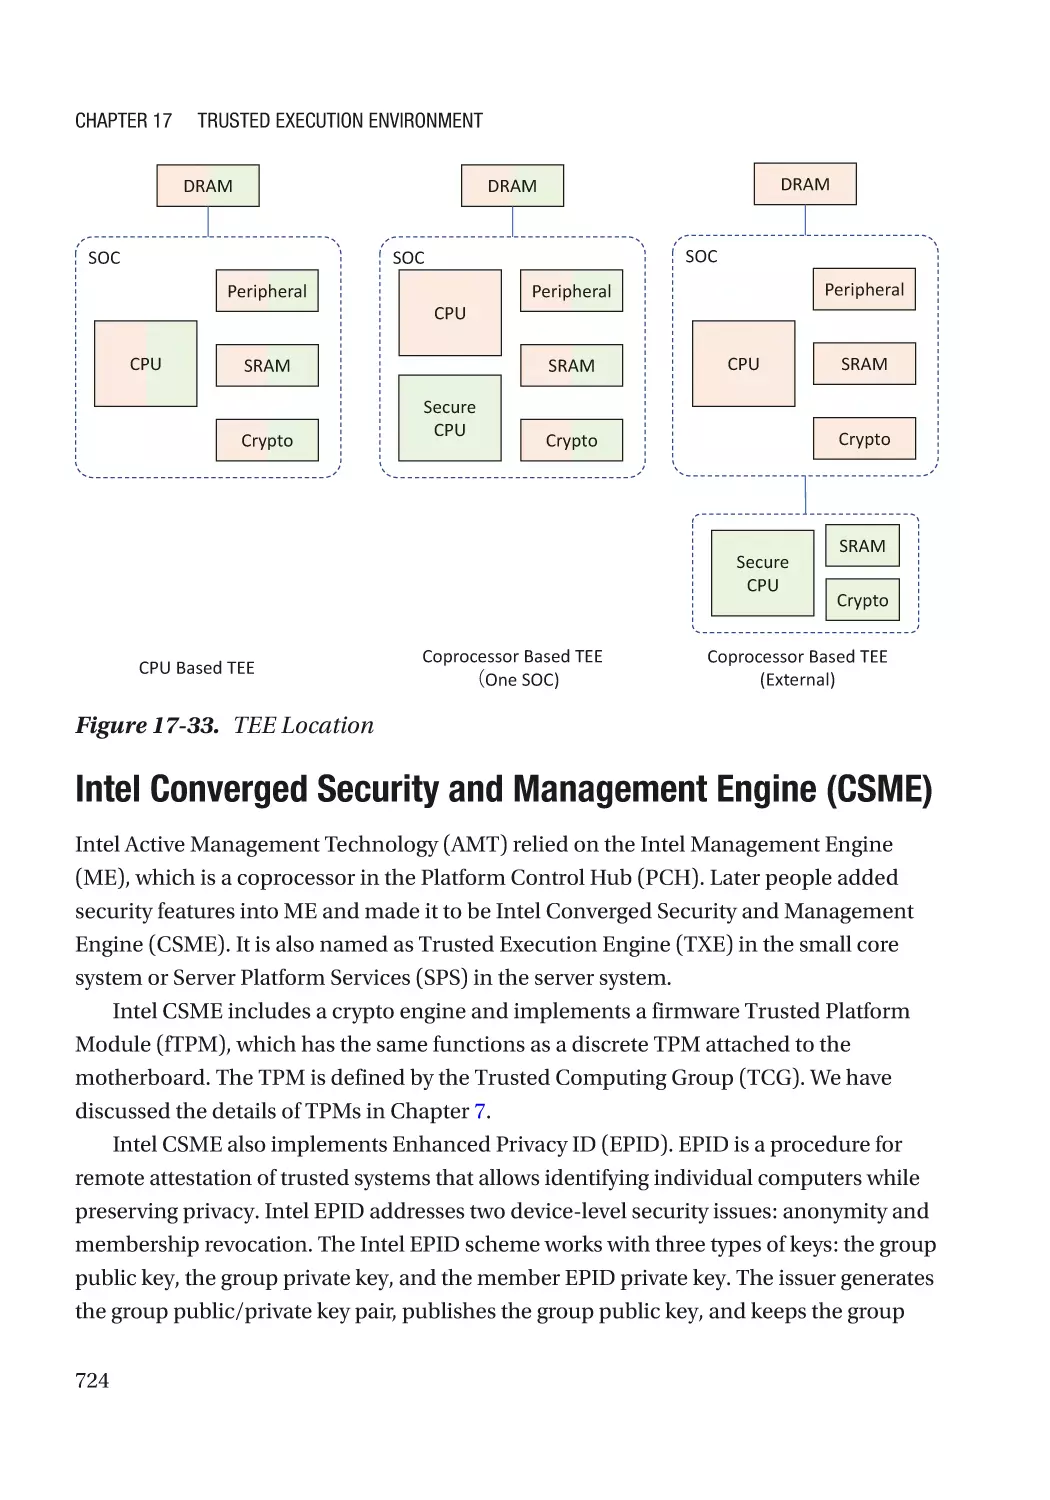 Intel Converged Security and Management Engine (CSME)